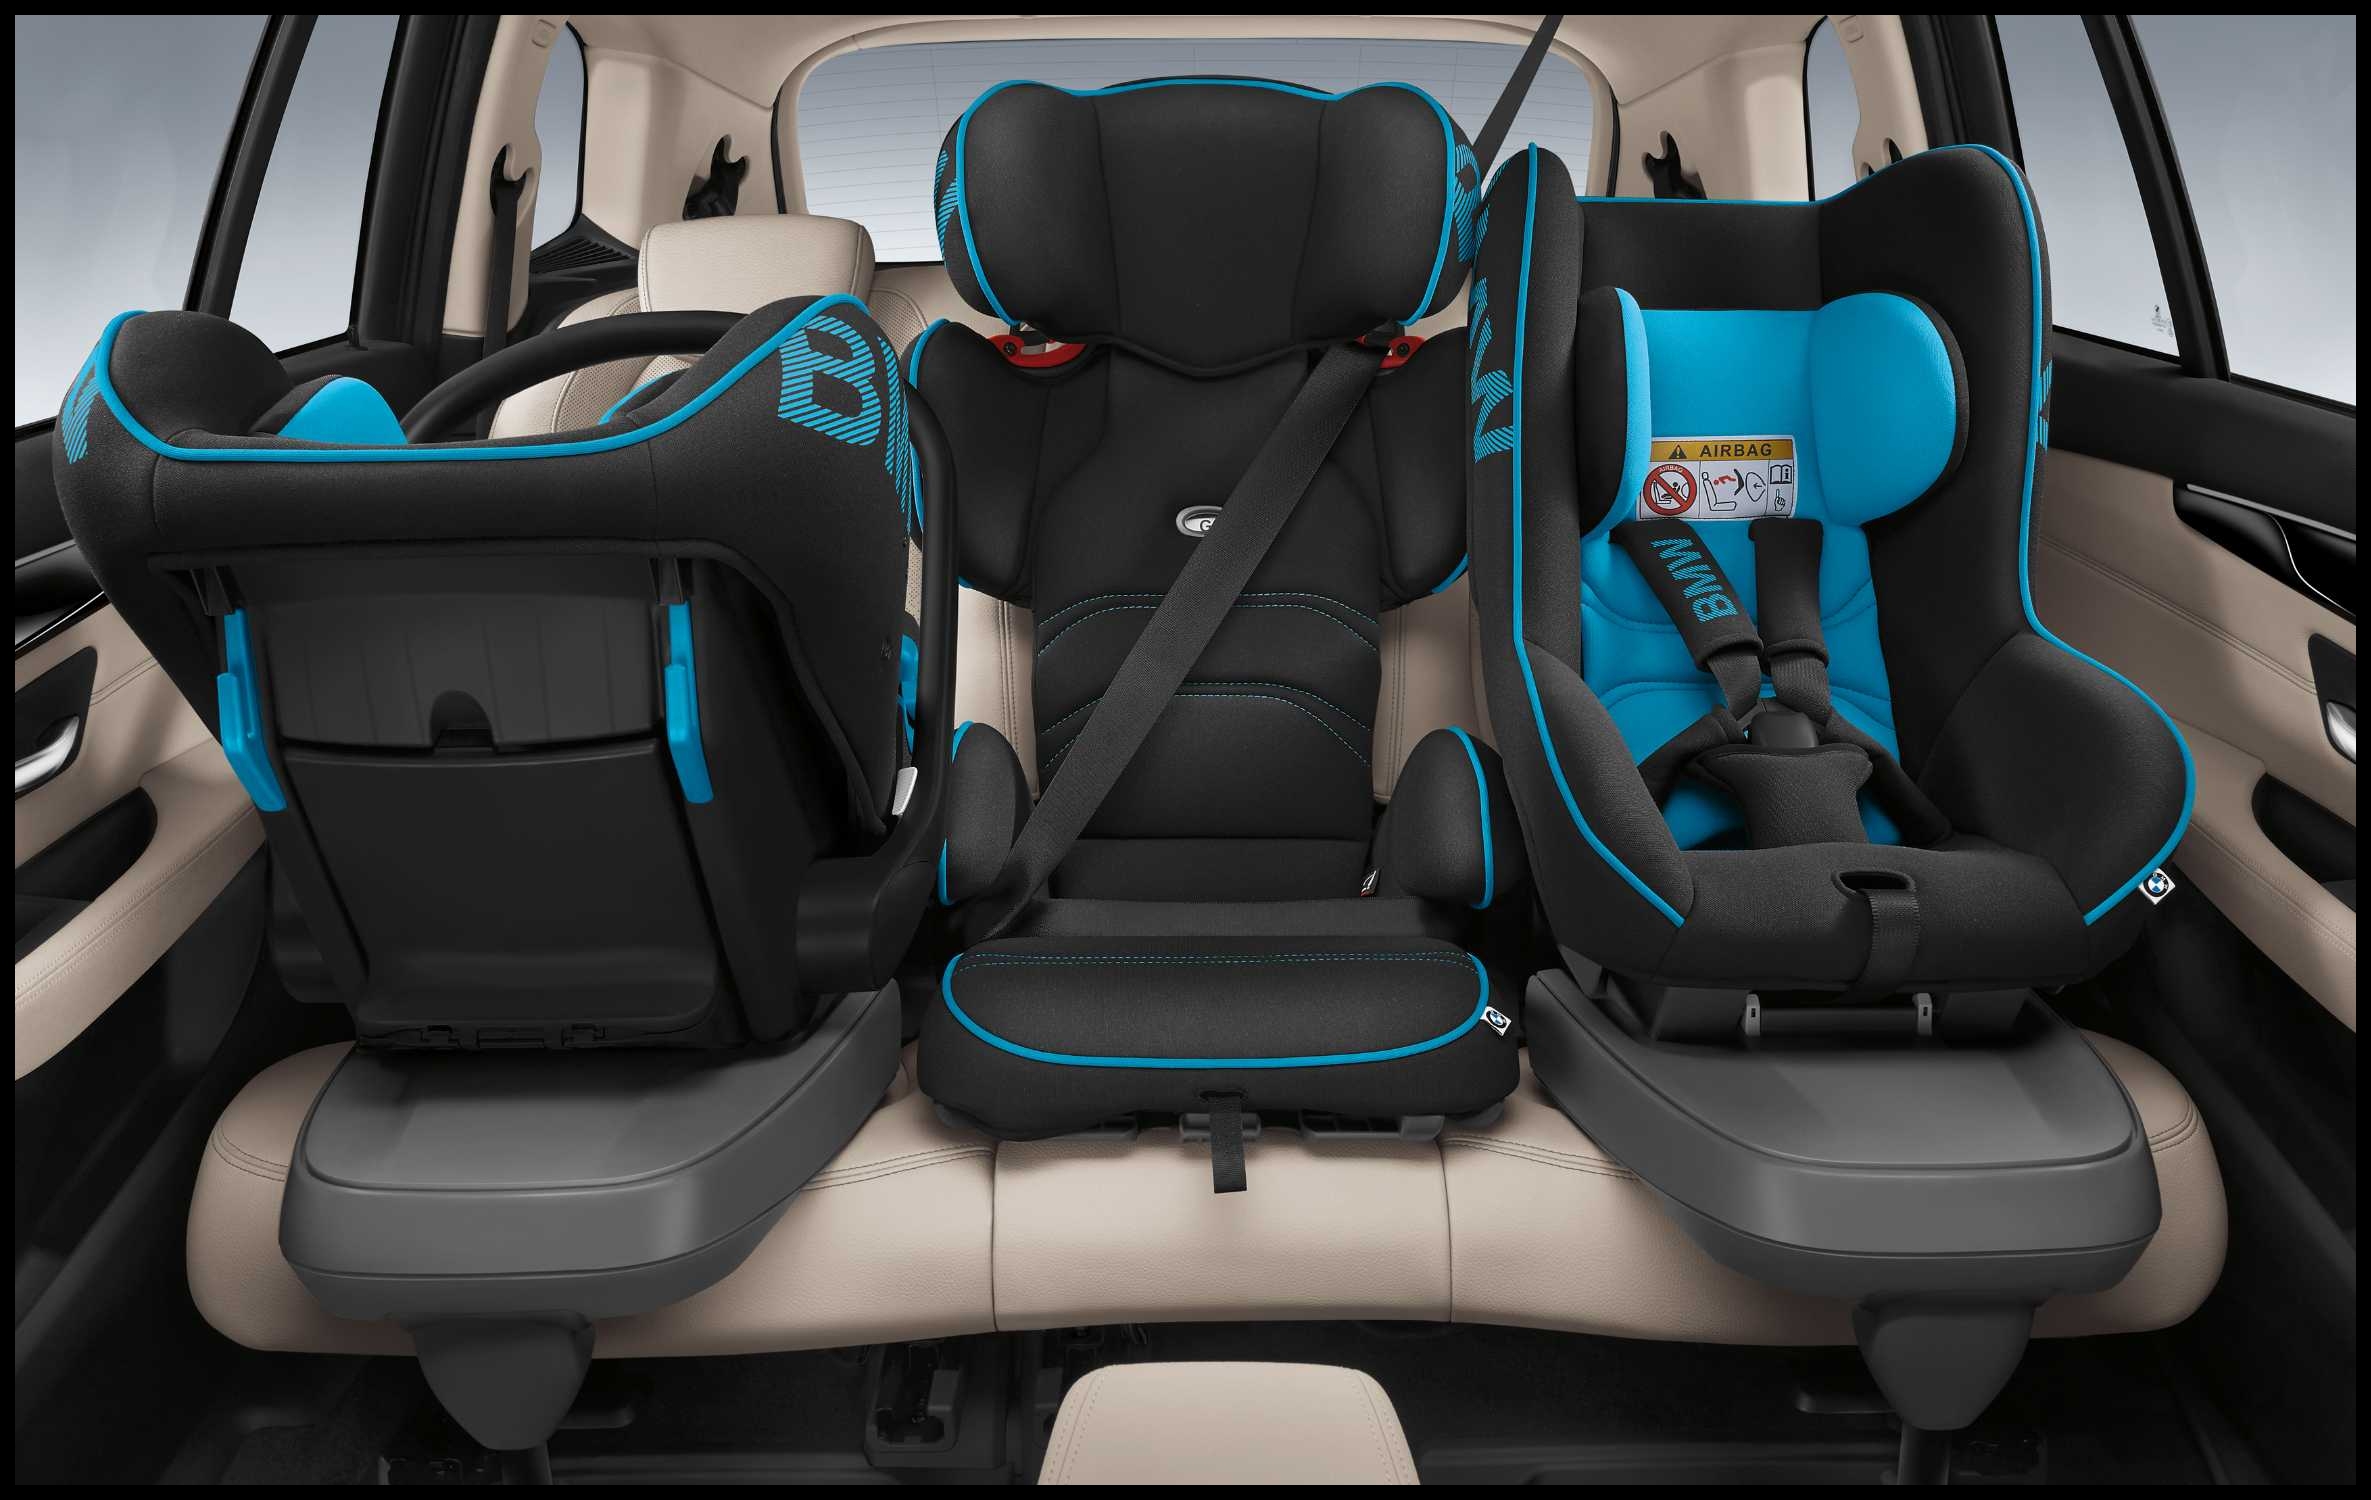 BMW 2 Series Gran Tourer Accessories BMW Baby Seat 0 with ISOFIX Base 02 2015